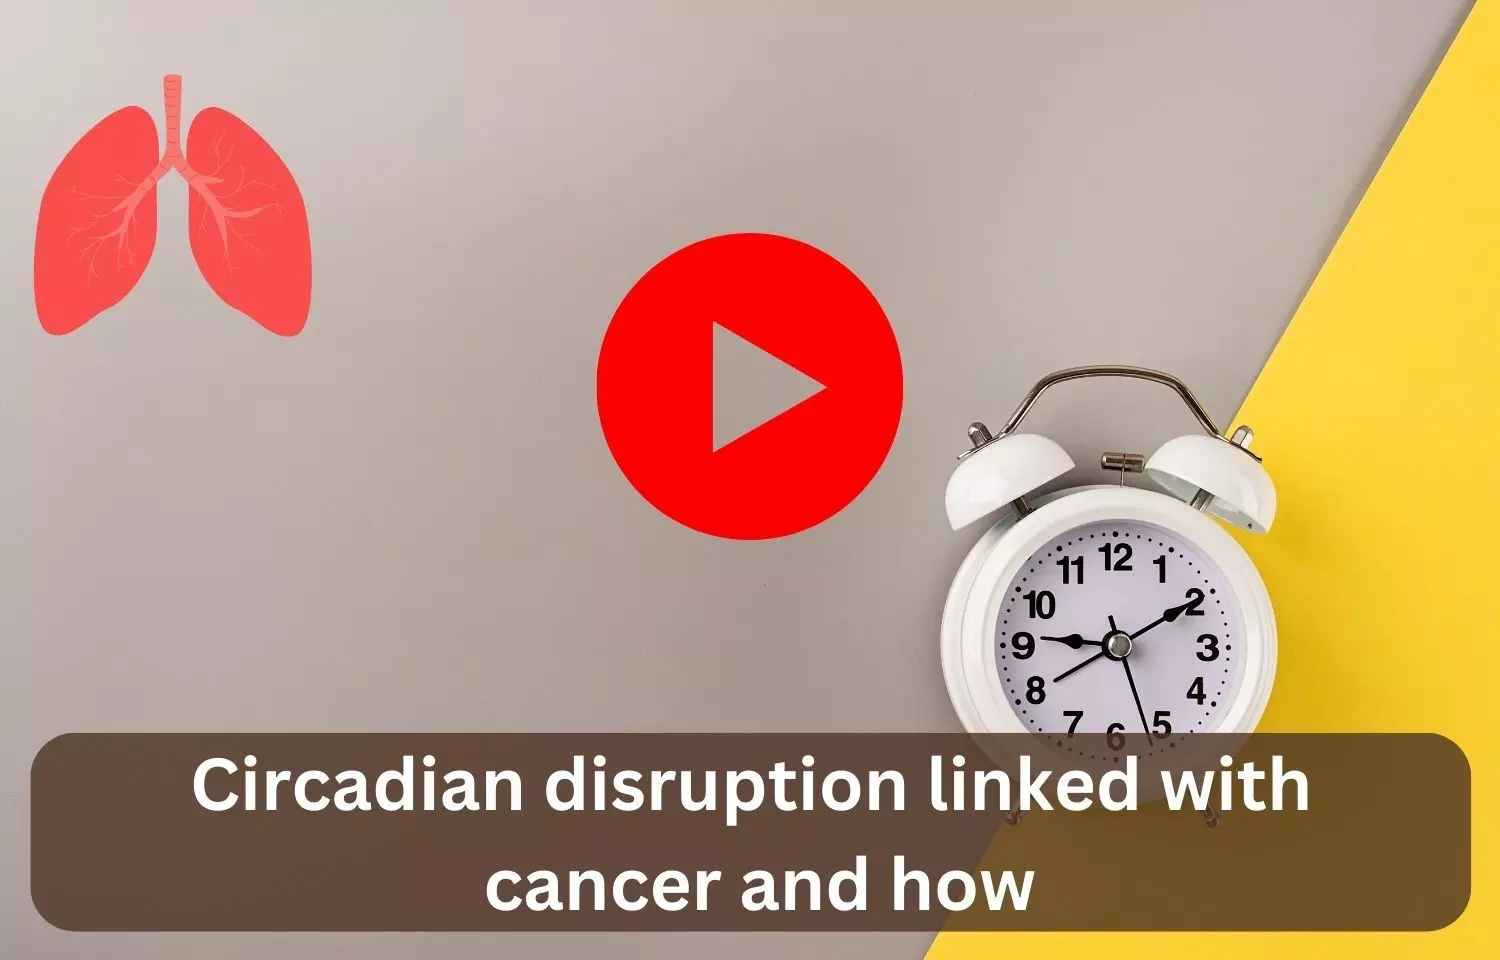 Circadian disruption linked with cancer and how